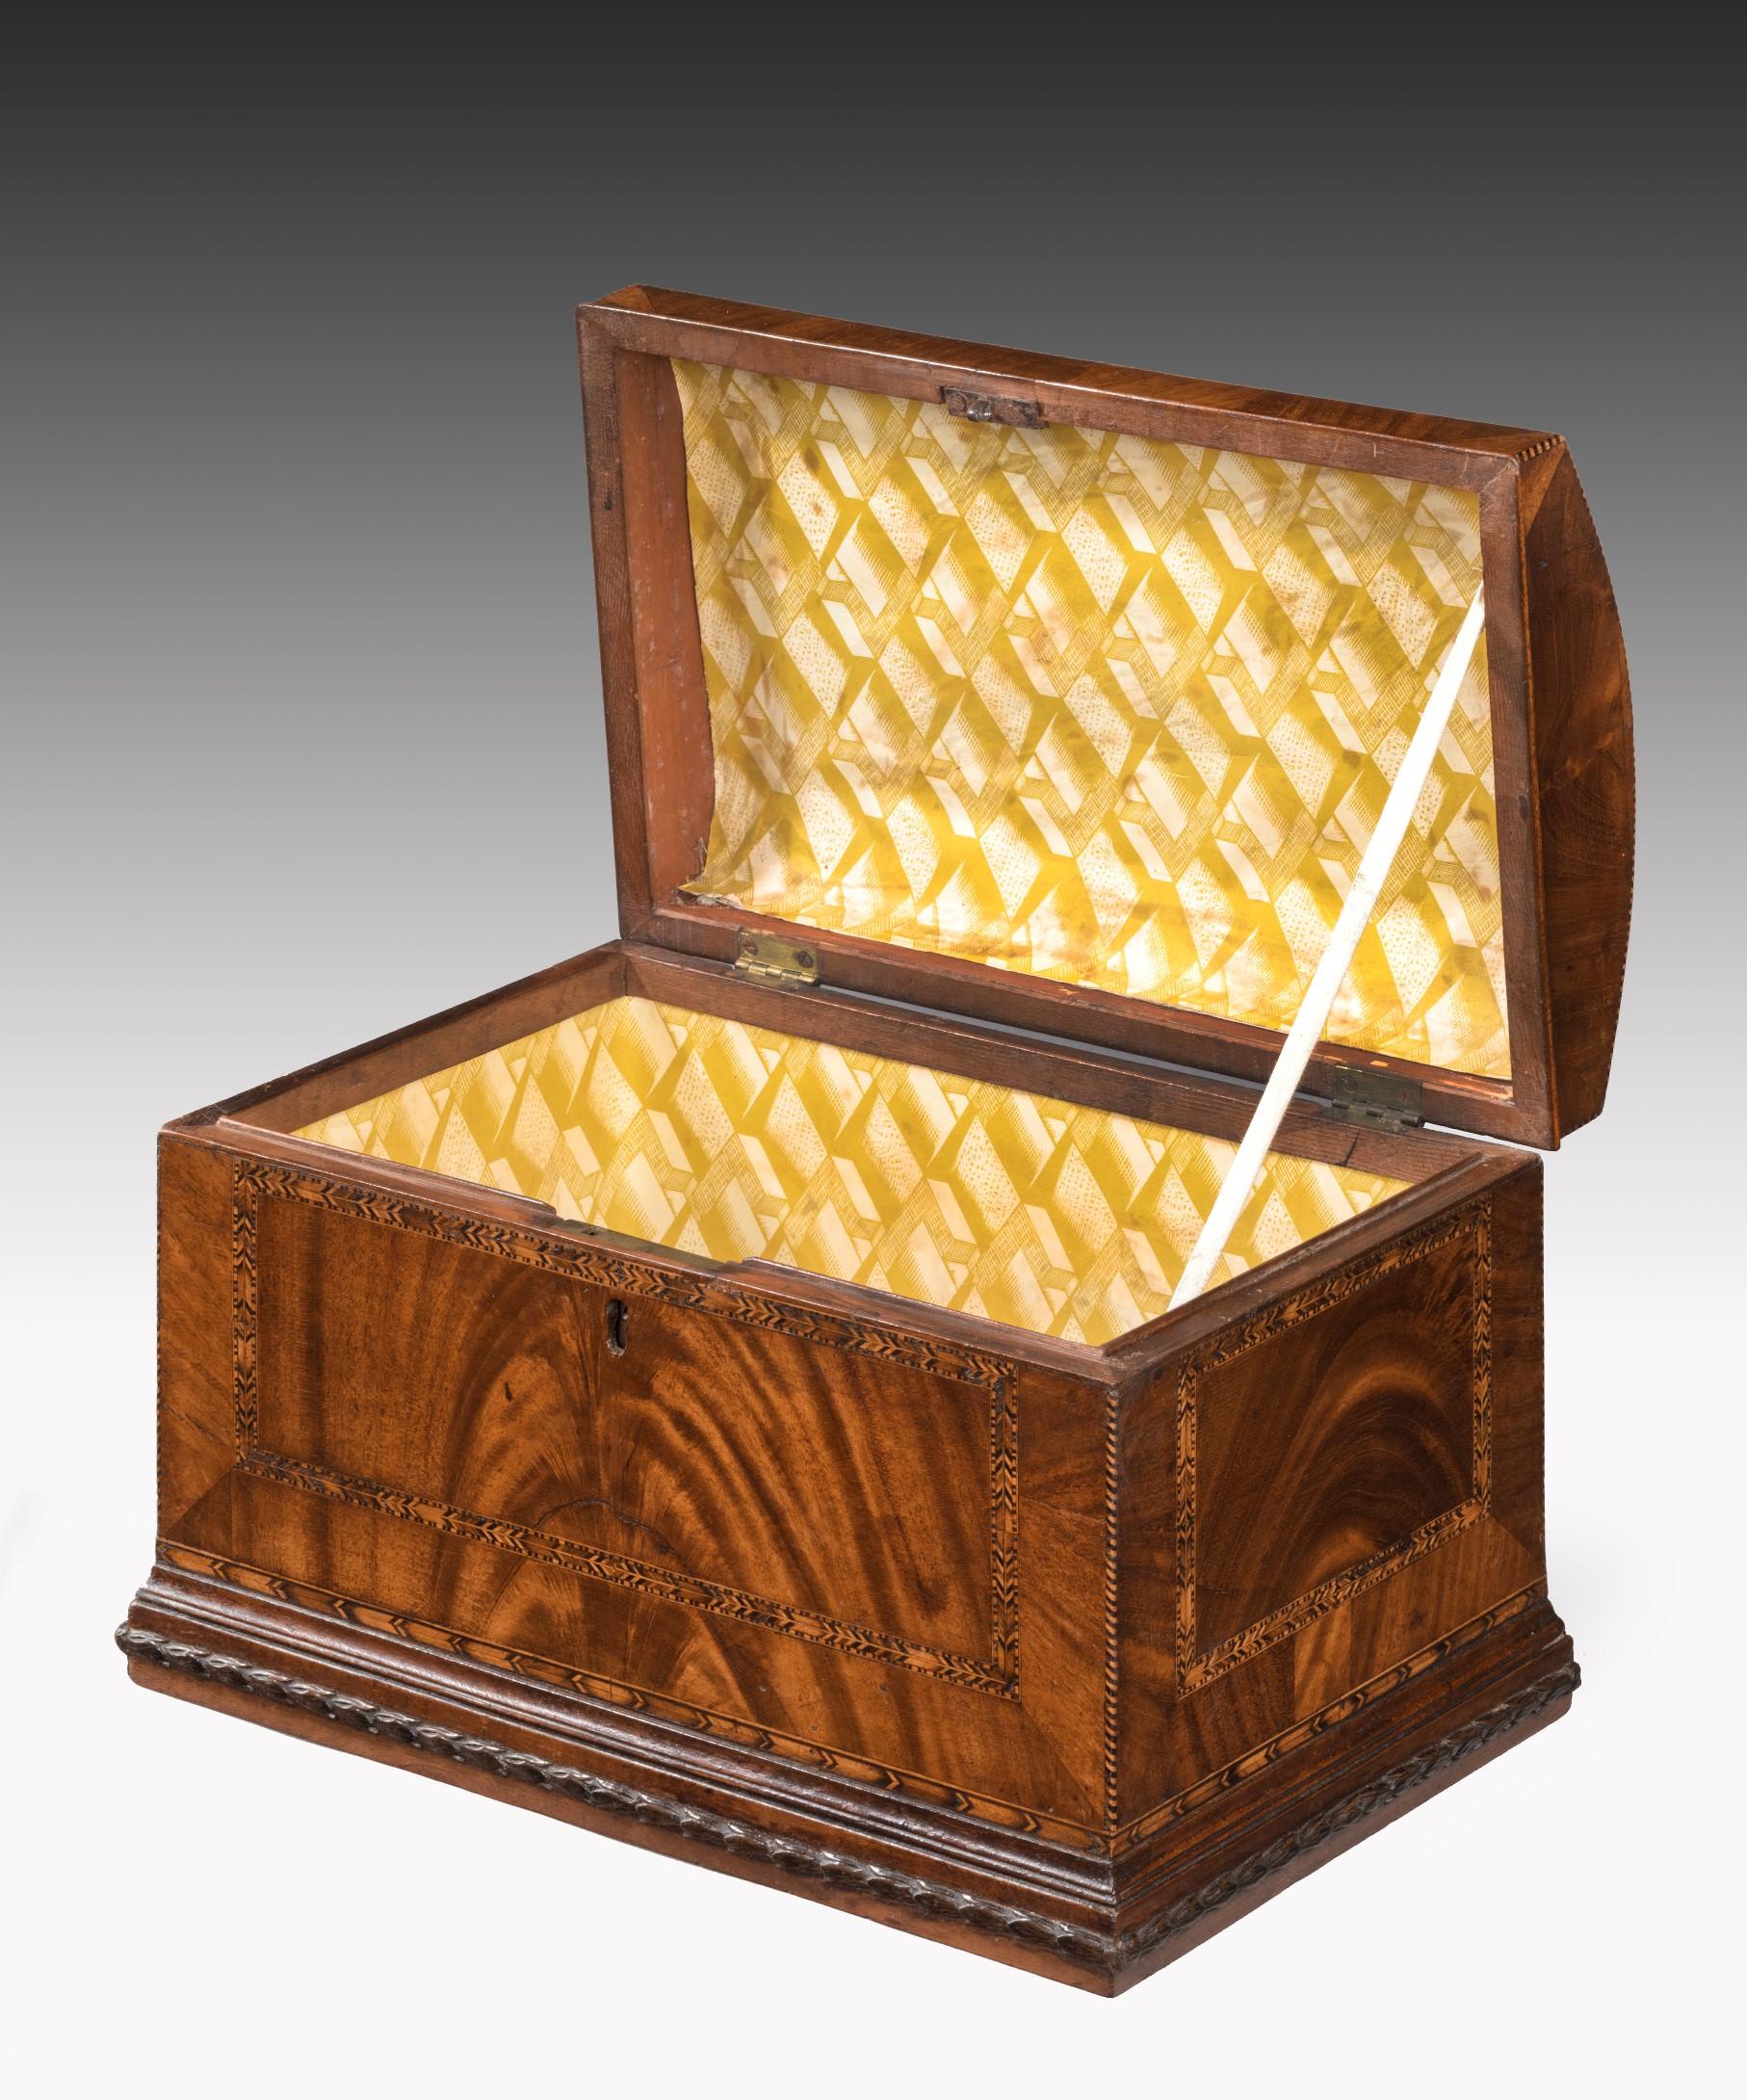 A superb Georgian mahogany domed box; the domed lid veneered in well figured mahogany and inlaid with feather banding and barber's pole stringing and retaining its original fire gilded handle; the sides veneered in flame mahogany and crossbanded in